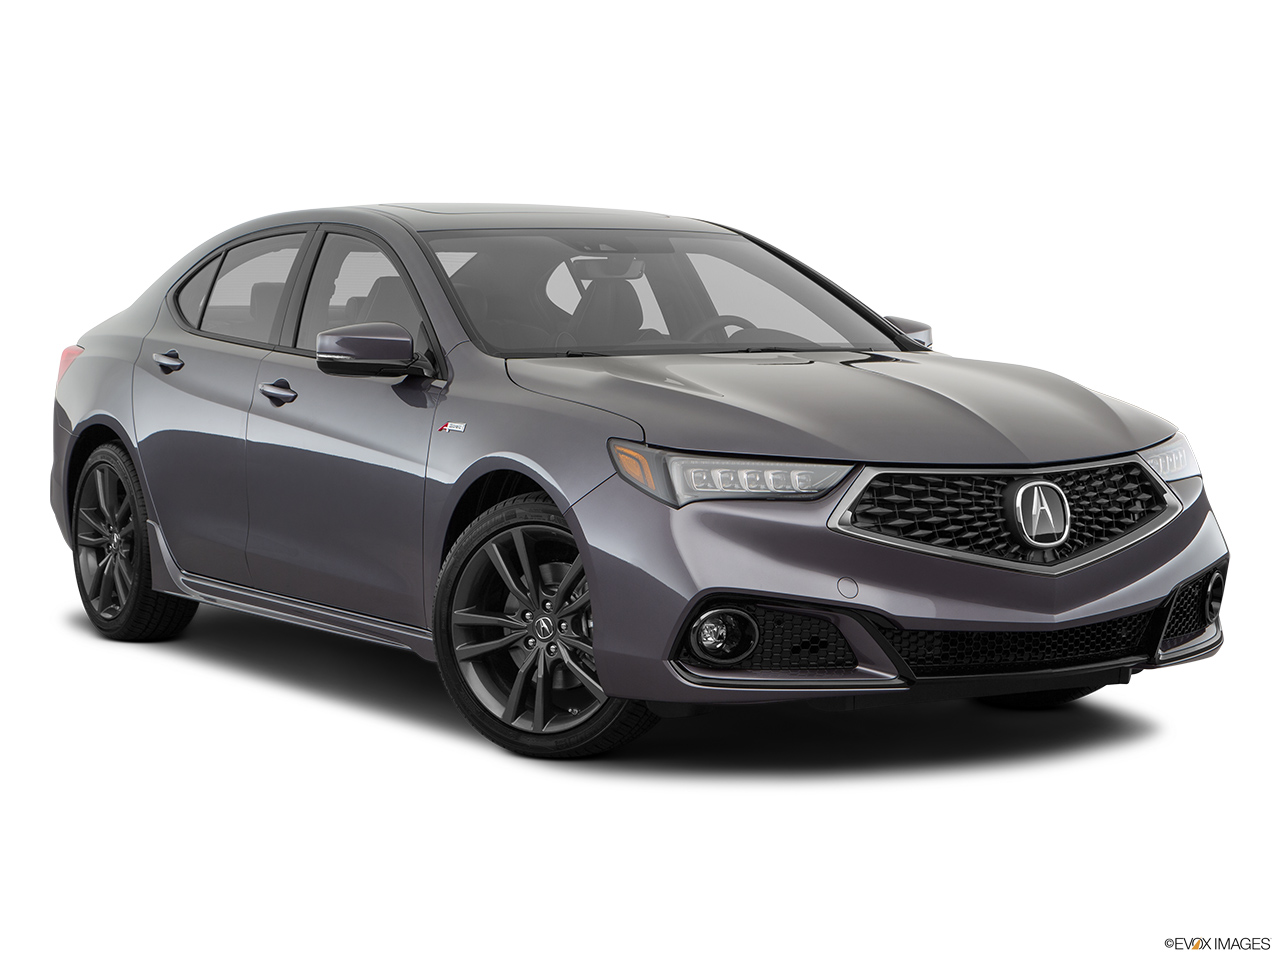 2019 Acura TLX 3.5L Front passenger 3/4 w/ wheels turned. 